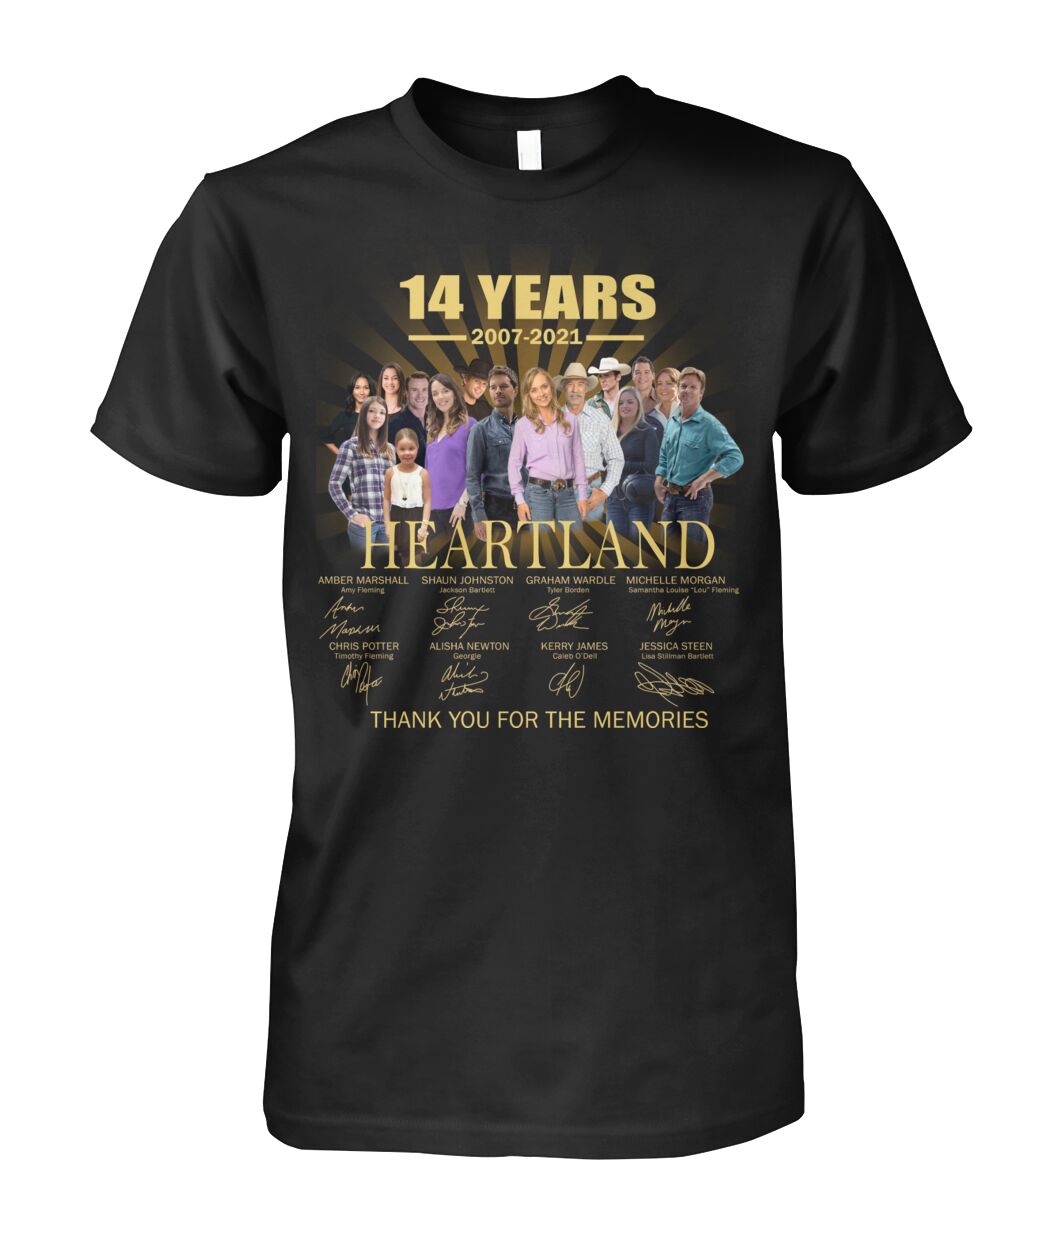 14 years Heartland signature thank you for the memories shirt, tank top and hoodie